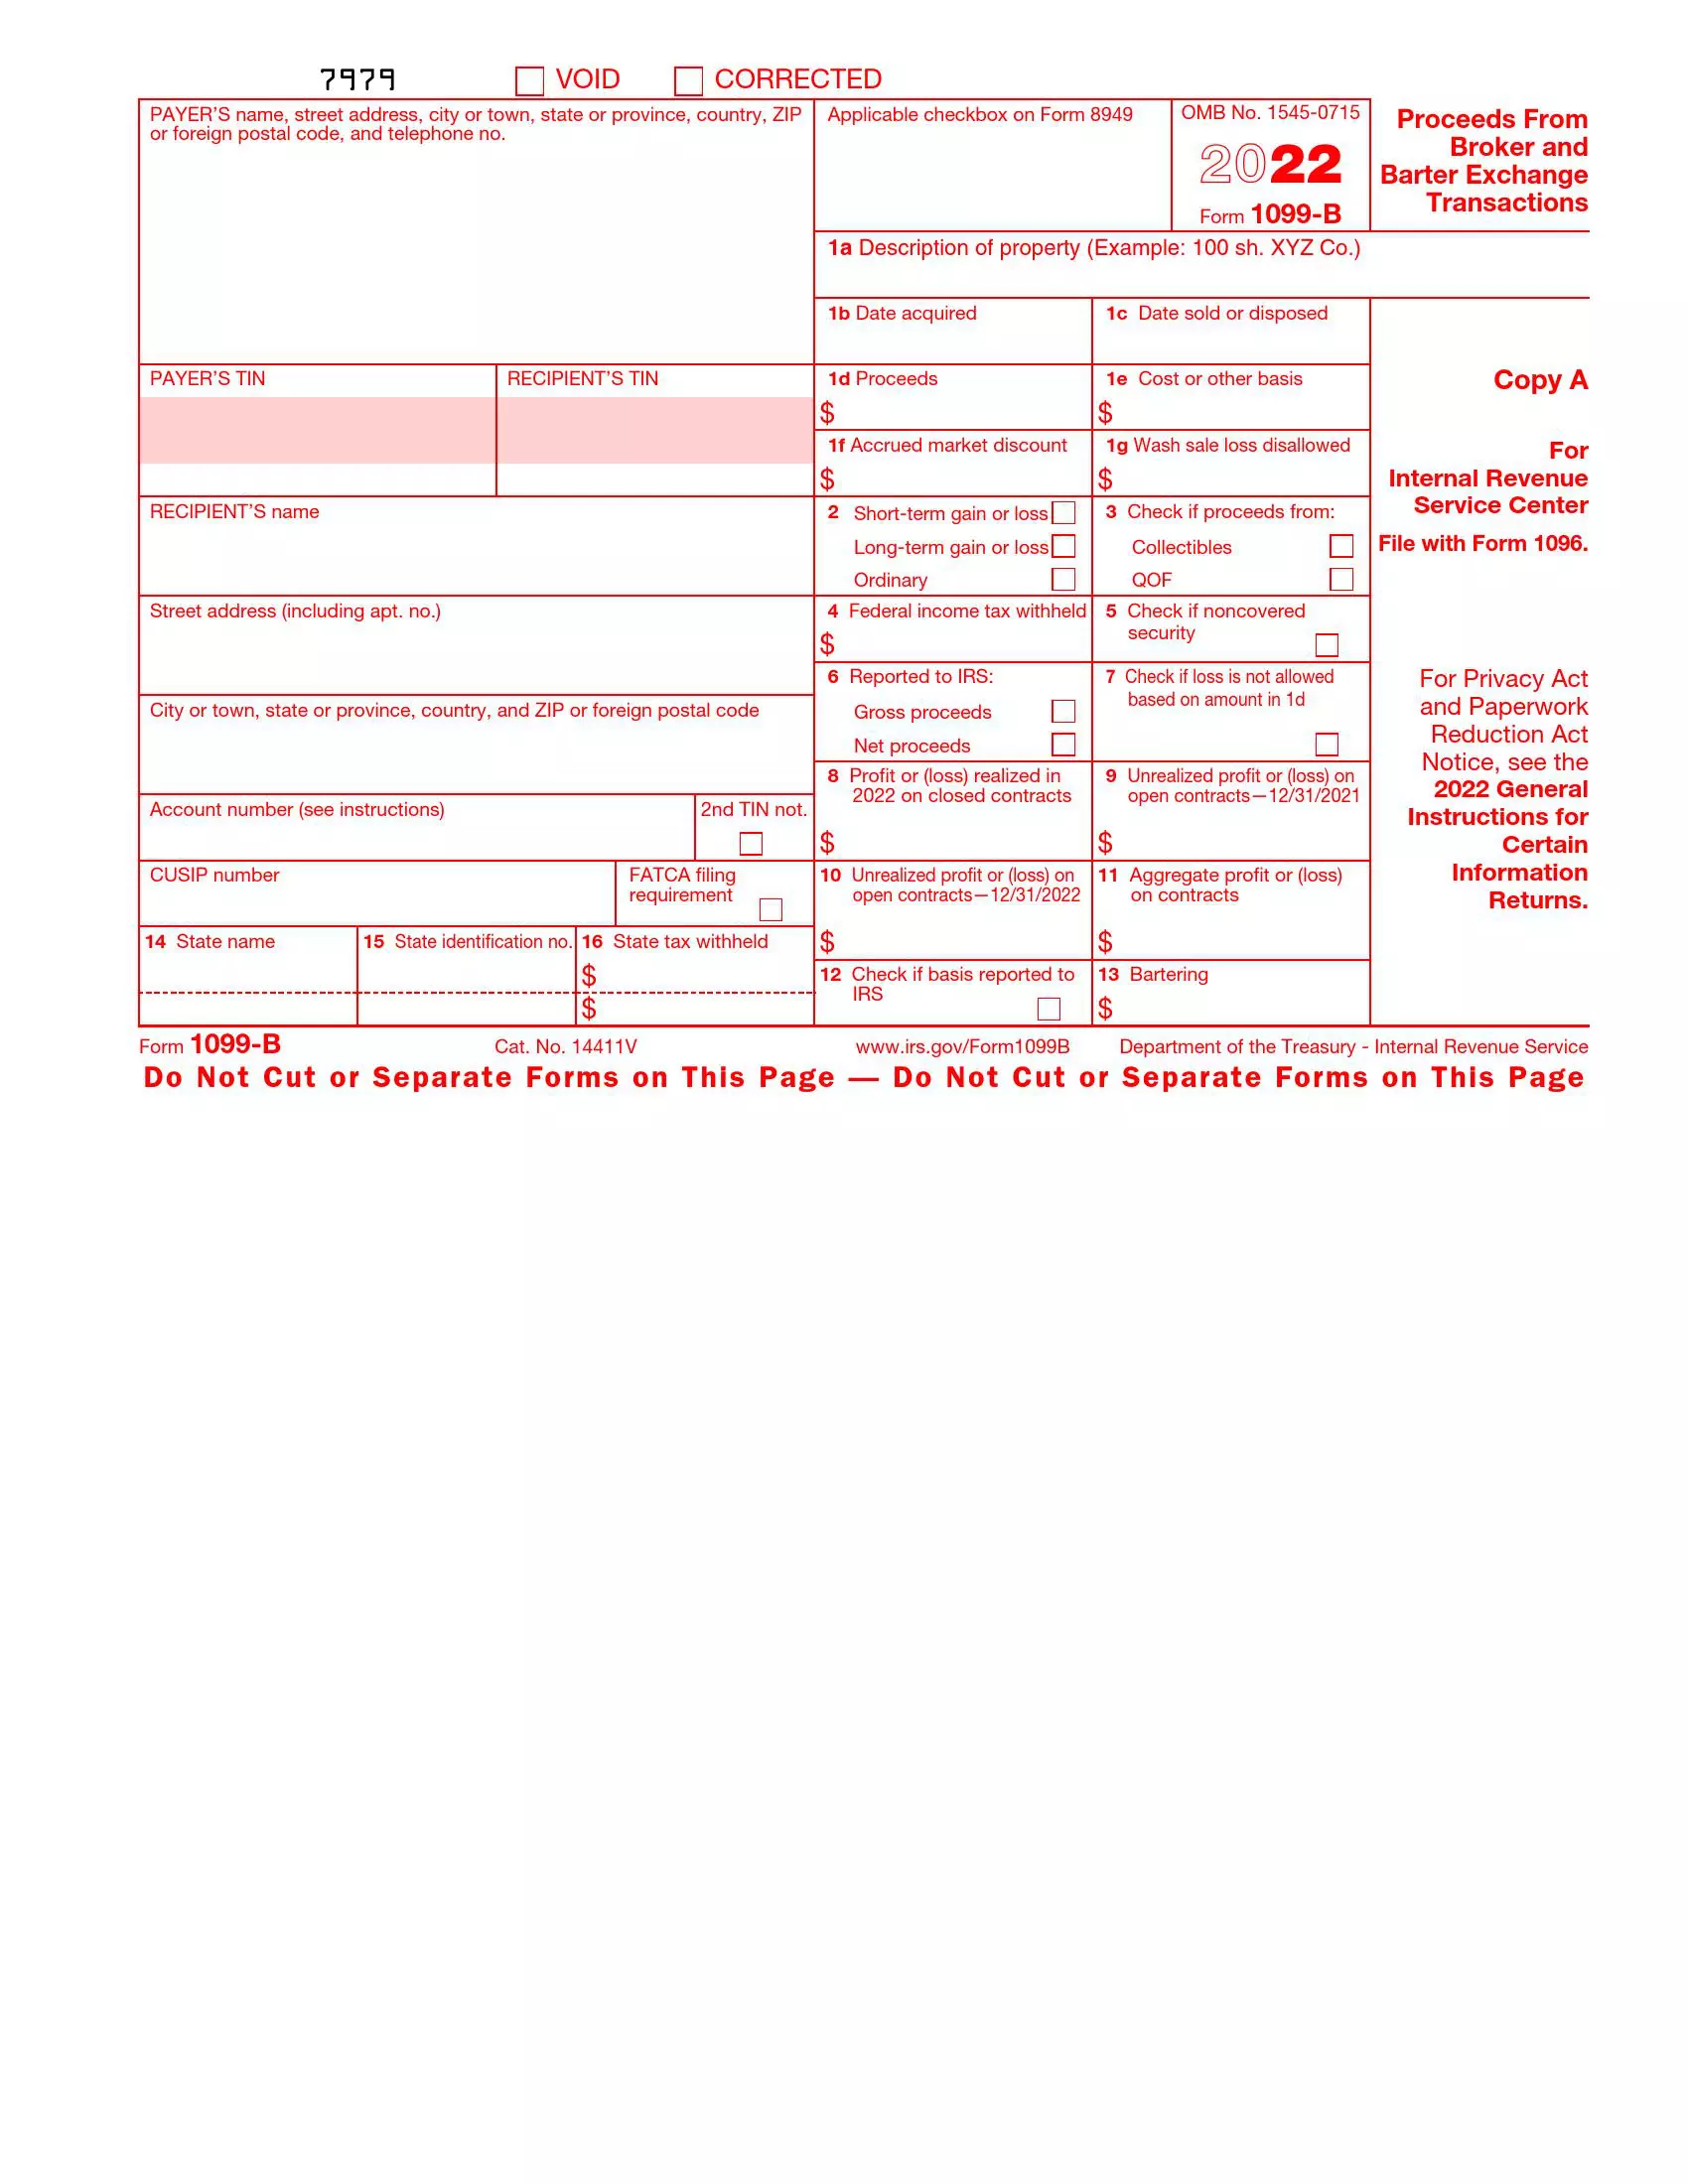 irs form 1099 b 2022 preview